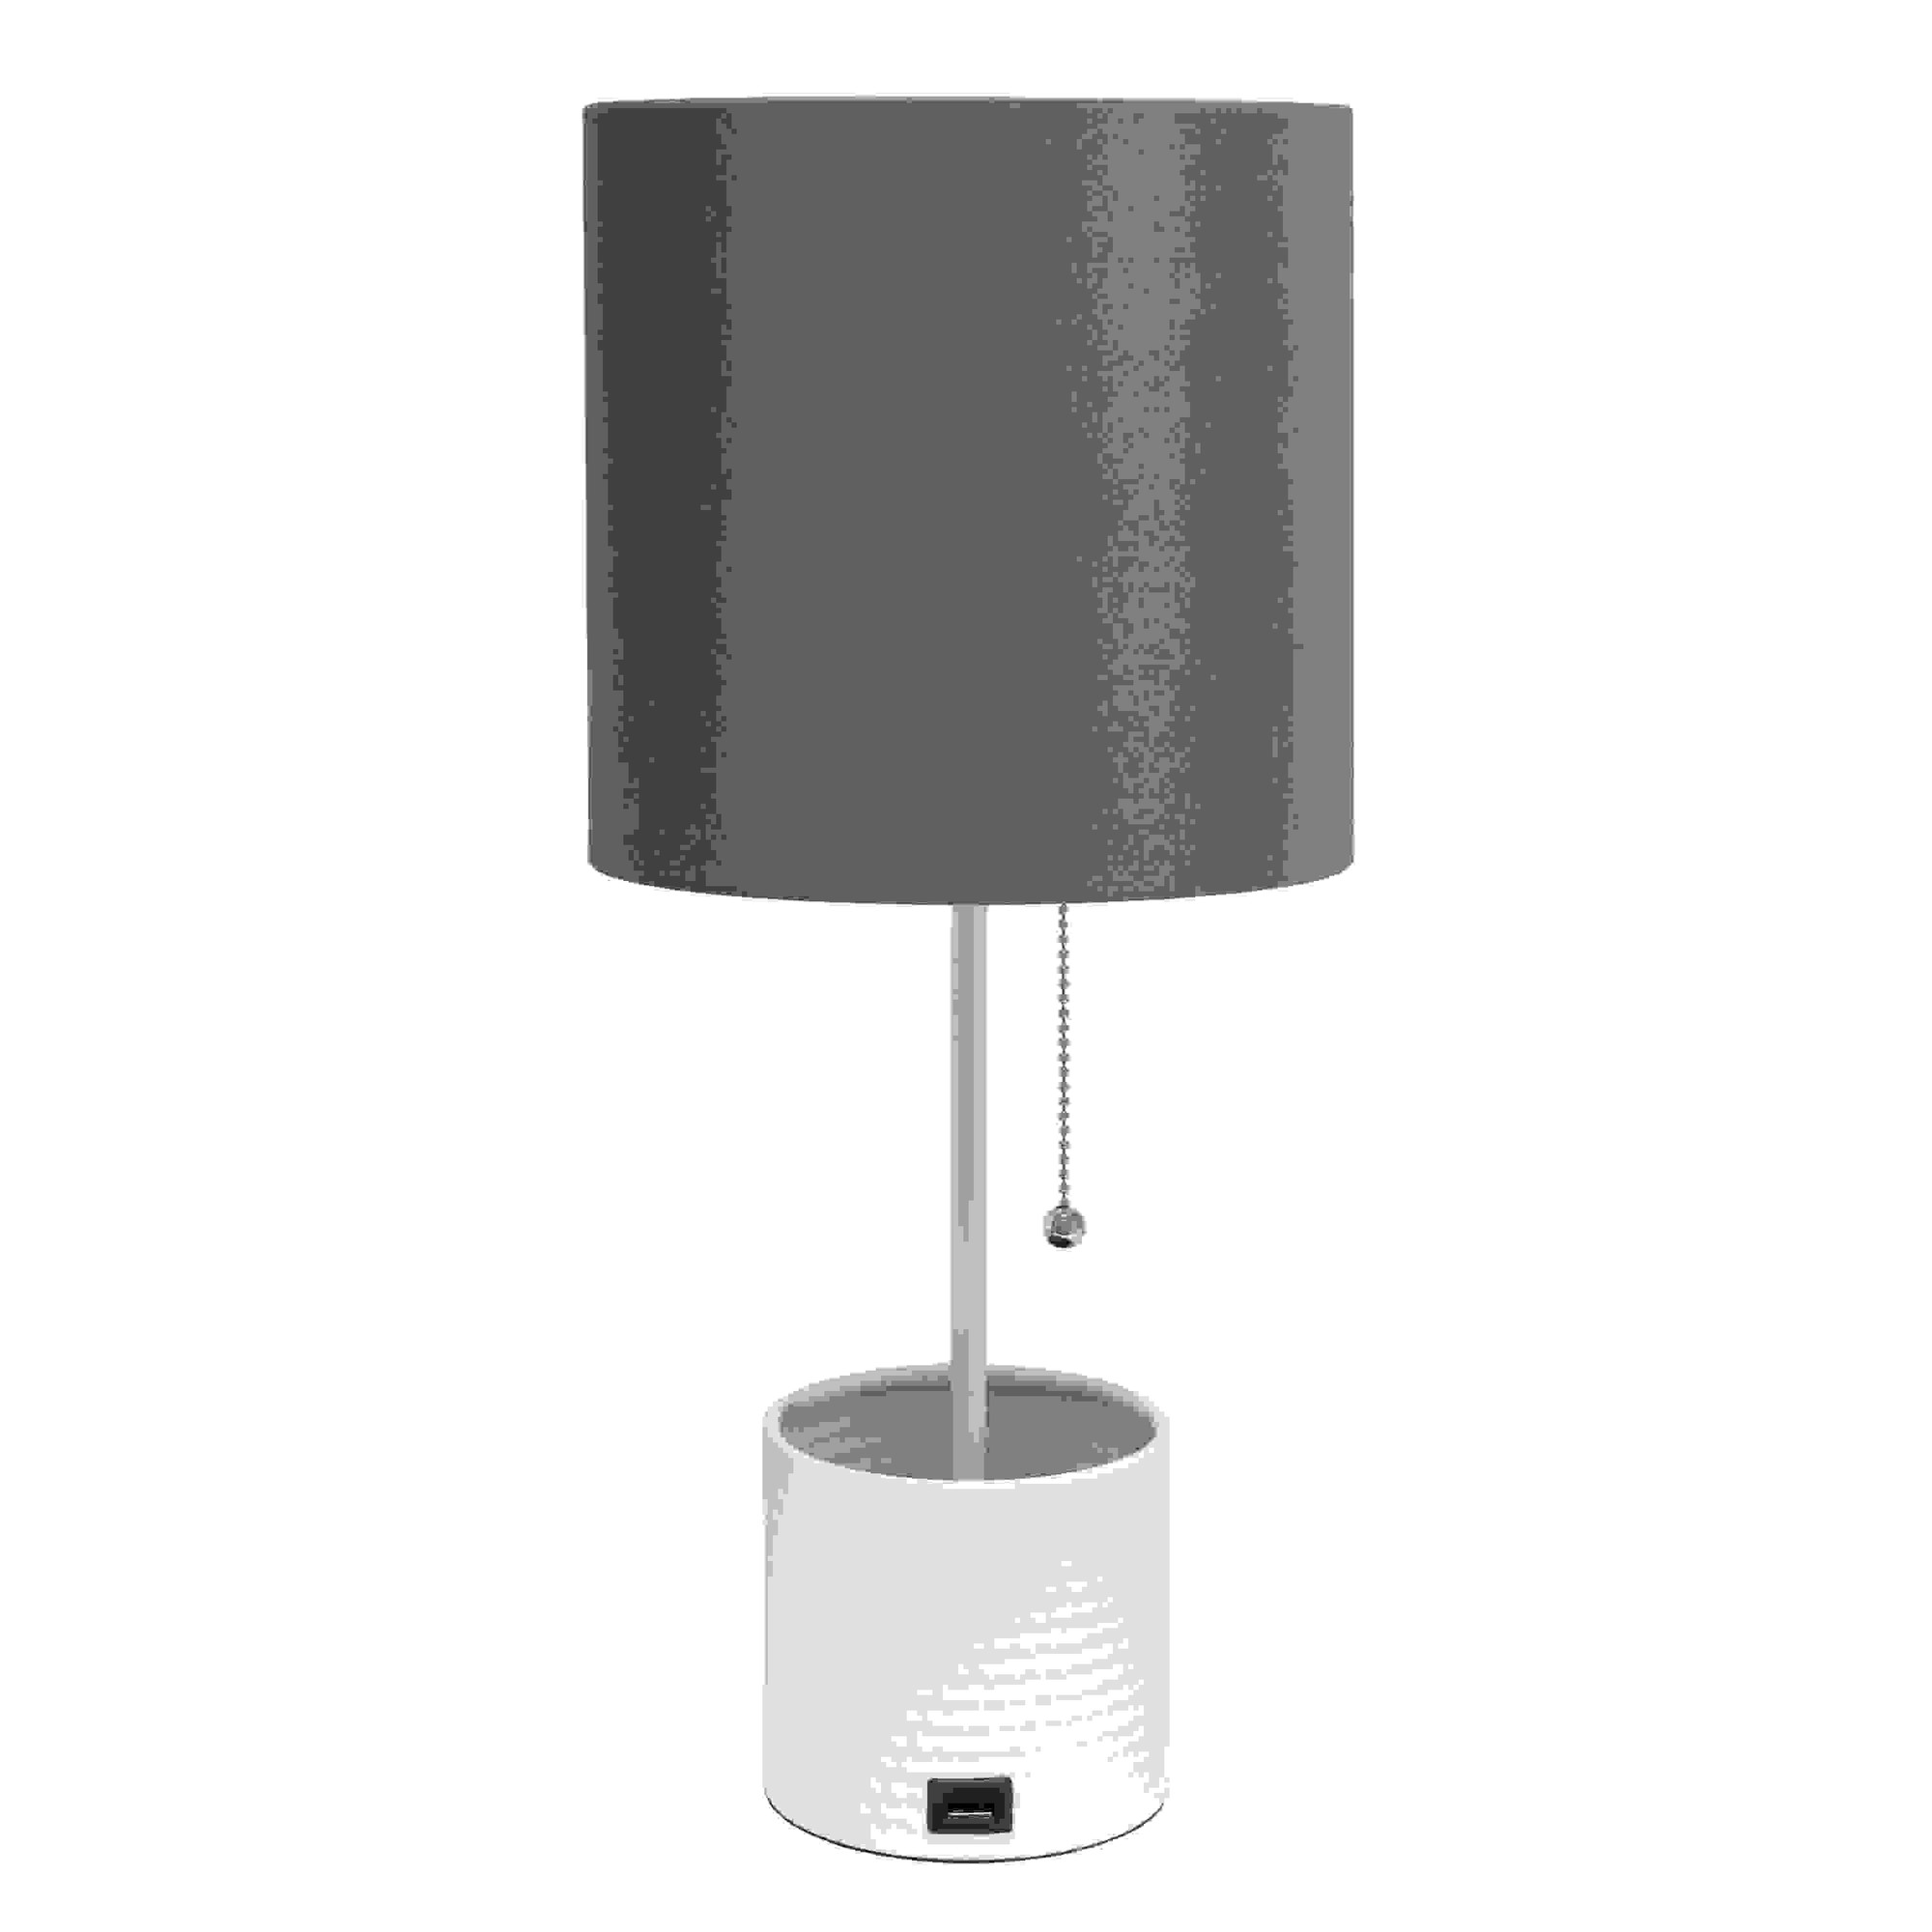 Simple Designs White Hammered Metal Organizer Table Lamp with USB charging port and Fabric Shade, Gray